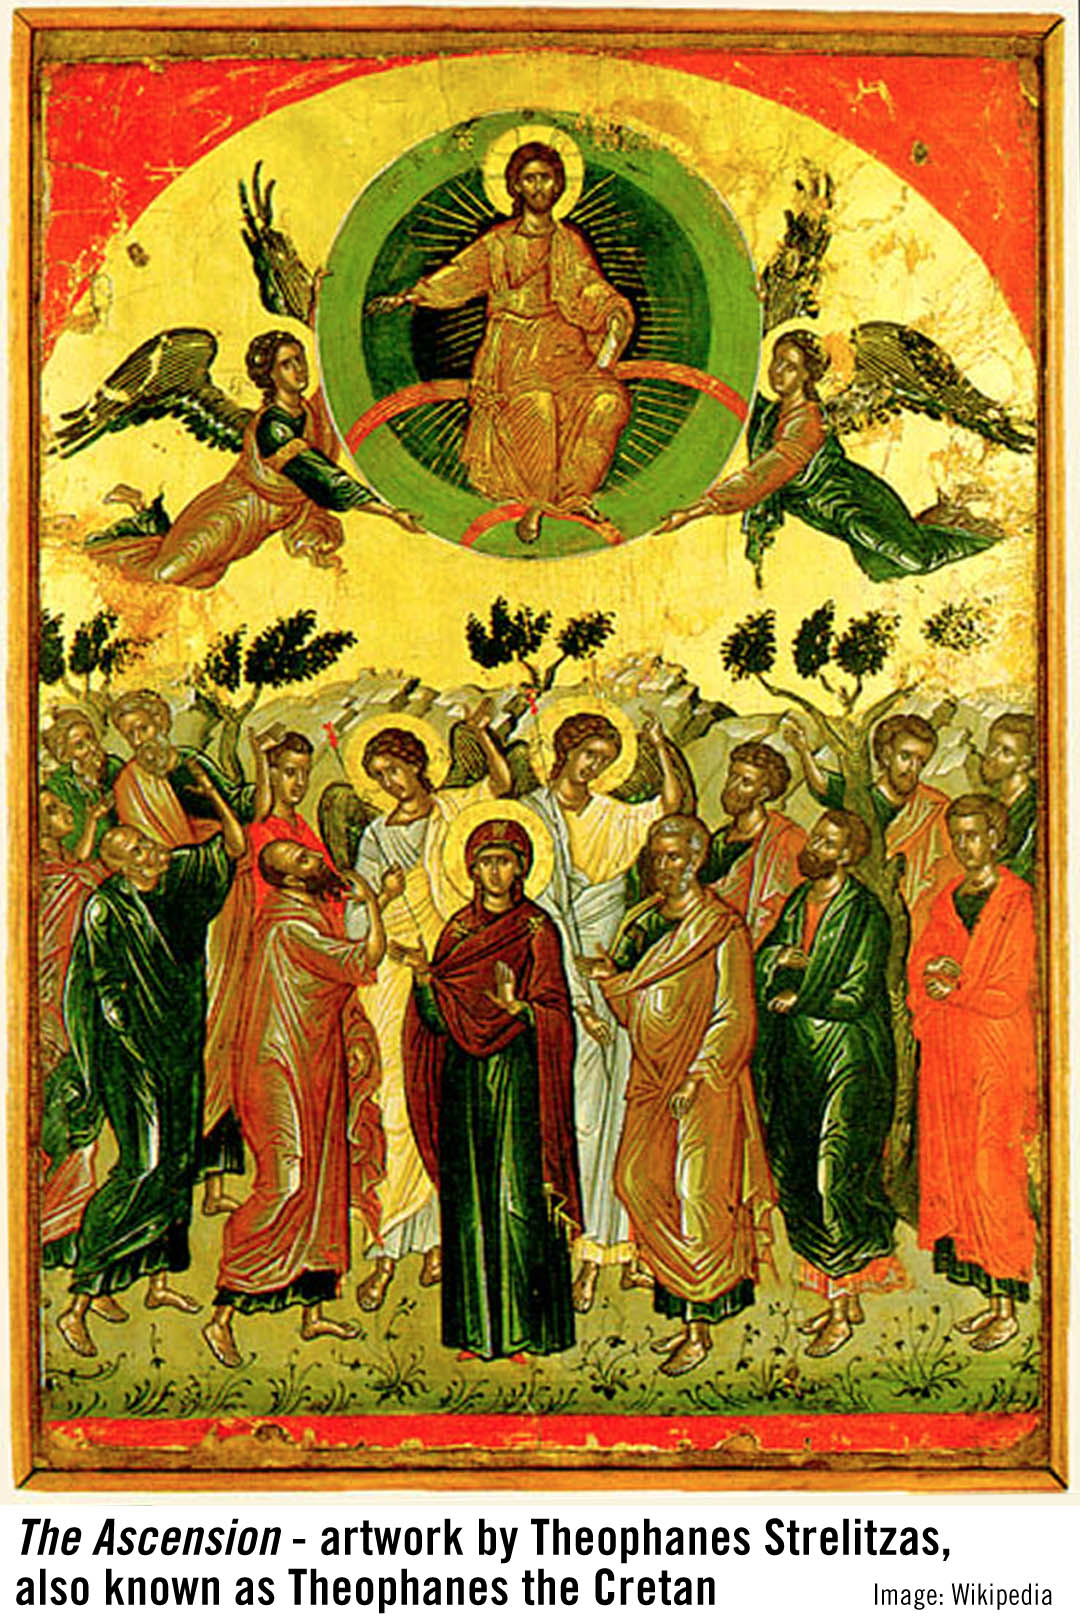 Theophanes Strelitzas, also known as Theophanes the Cretan - painting of the artowkr THE ASCENSION